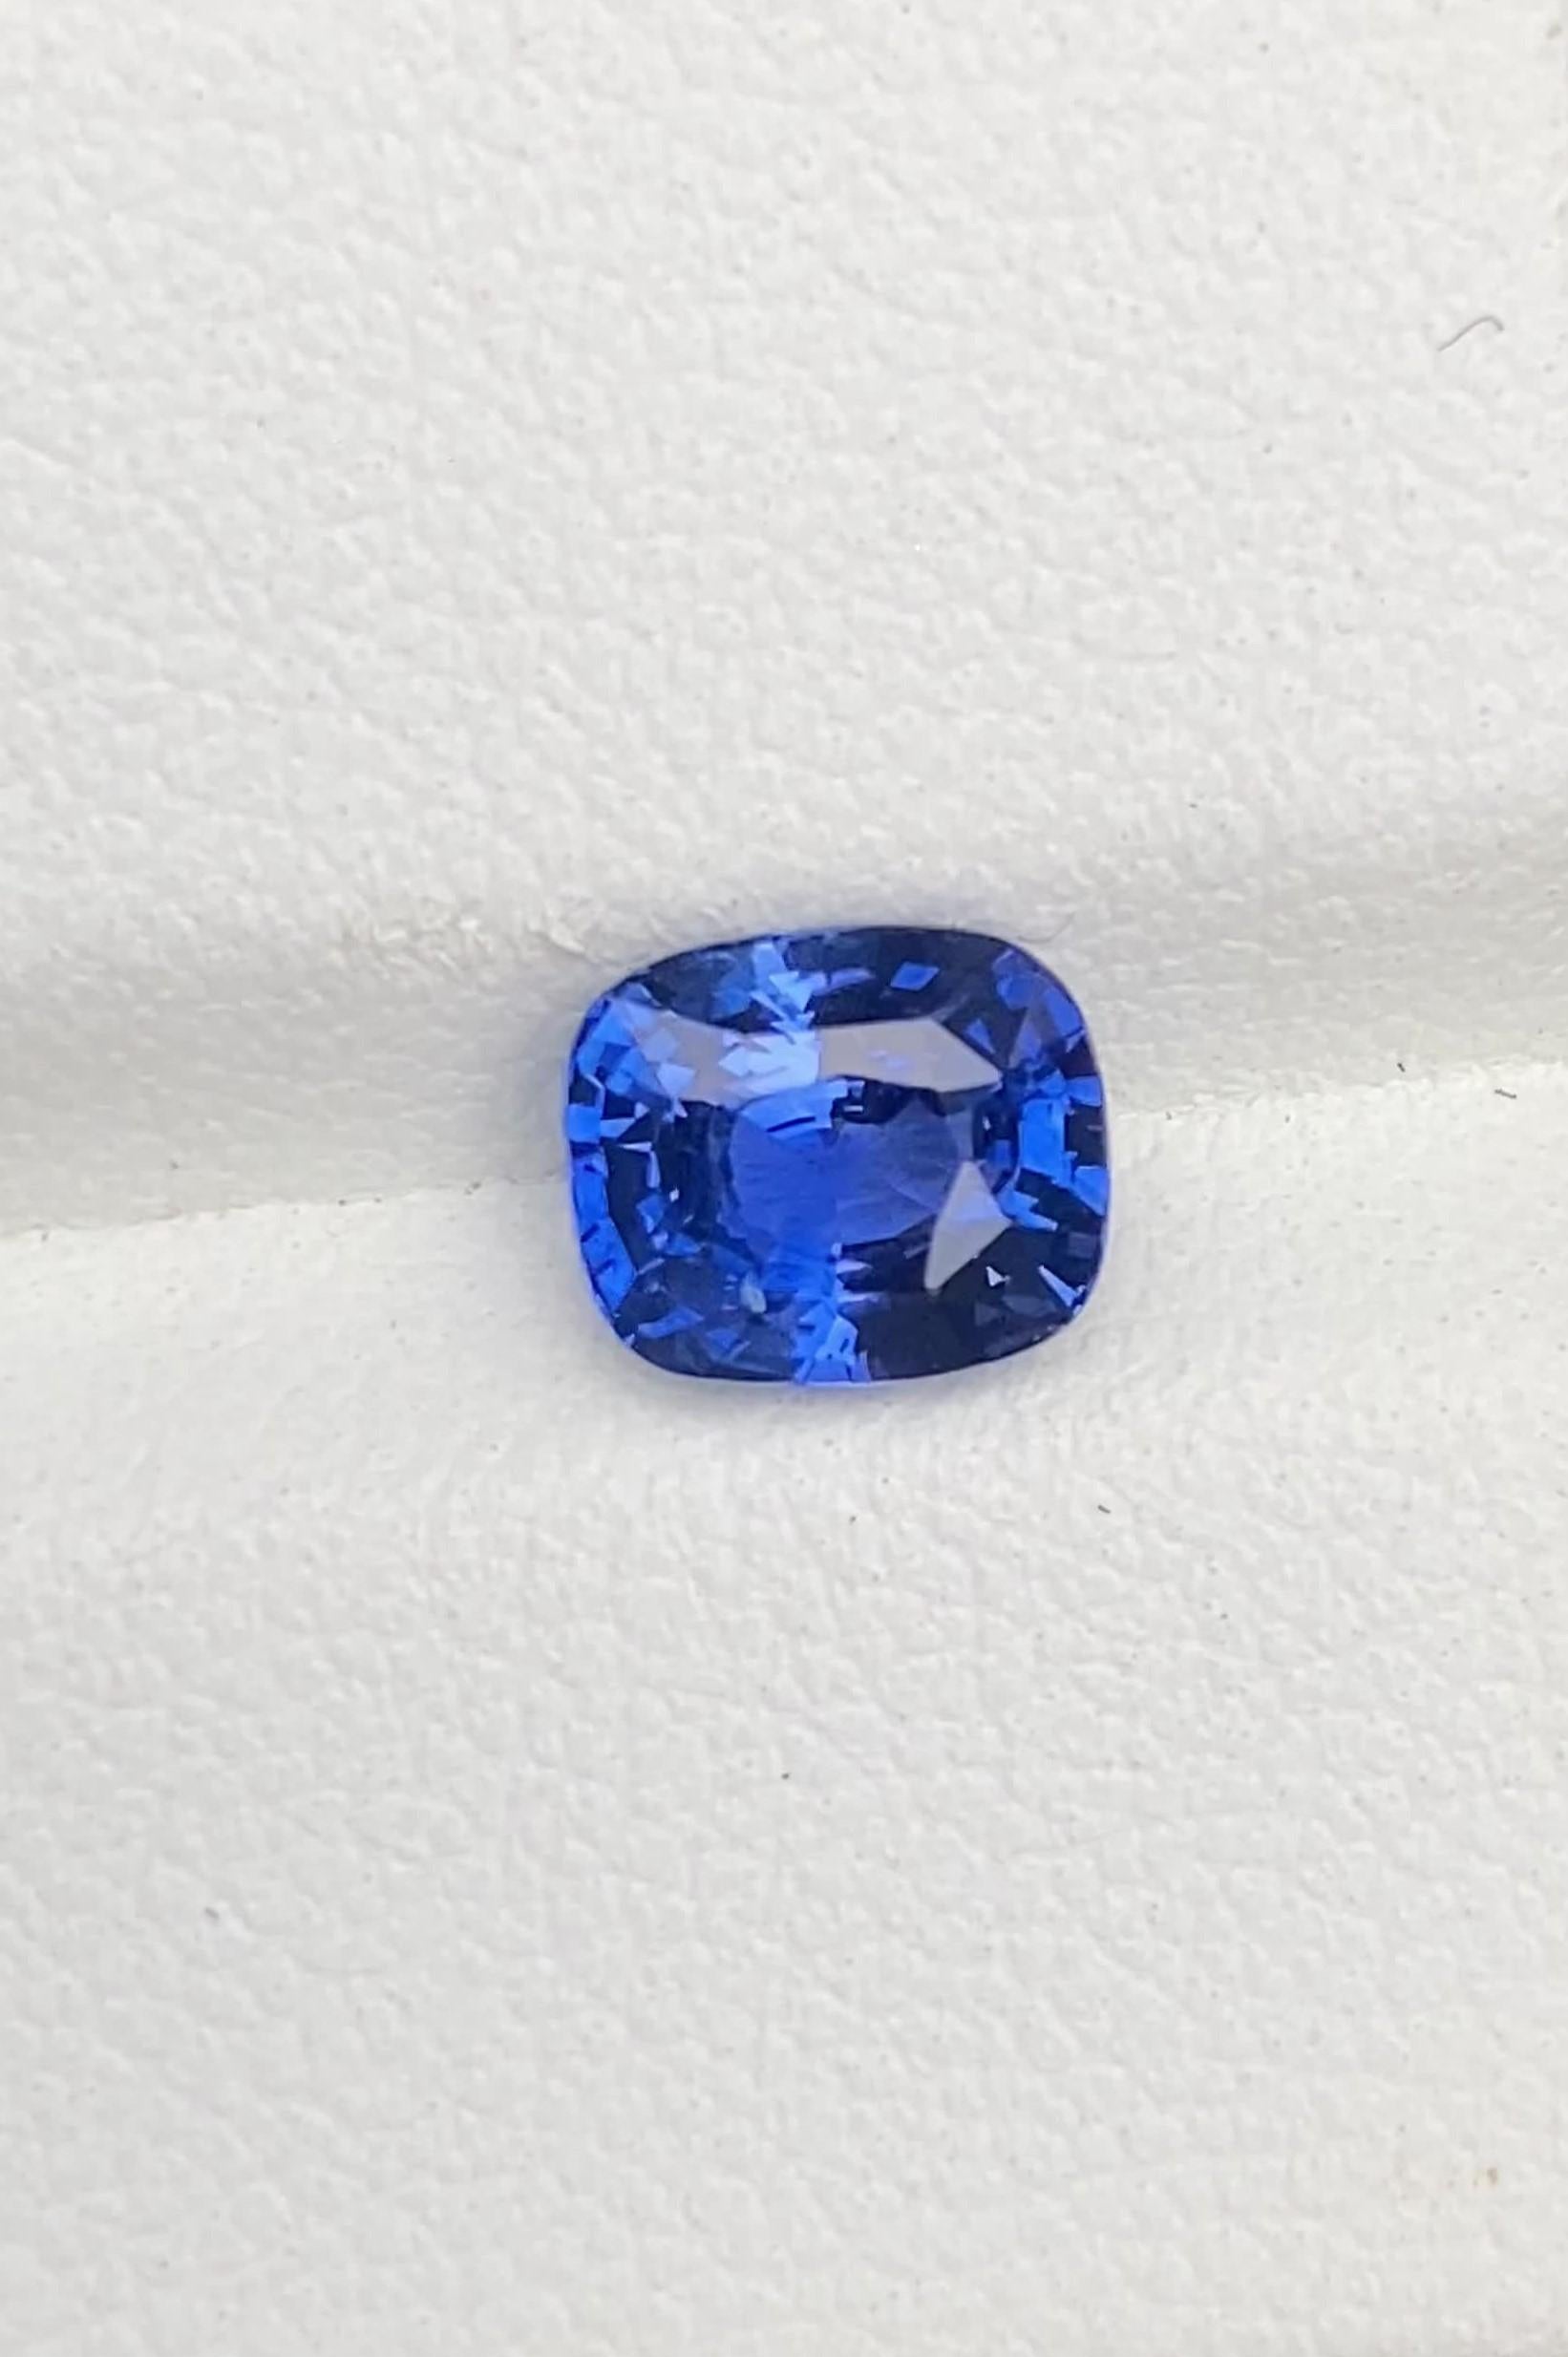 Natural quality Sapphire, This exquisite gemstone originates from Ceylon (Sri Lanka), known for producing exceptional quality stones. With its internally flawless clarity.

• Variety: Blue Sapphire 
• Origin: Sri Lanka (Ceylon)
• Color(s):